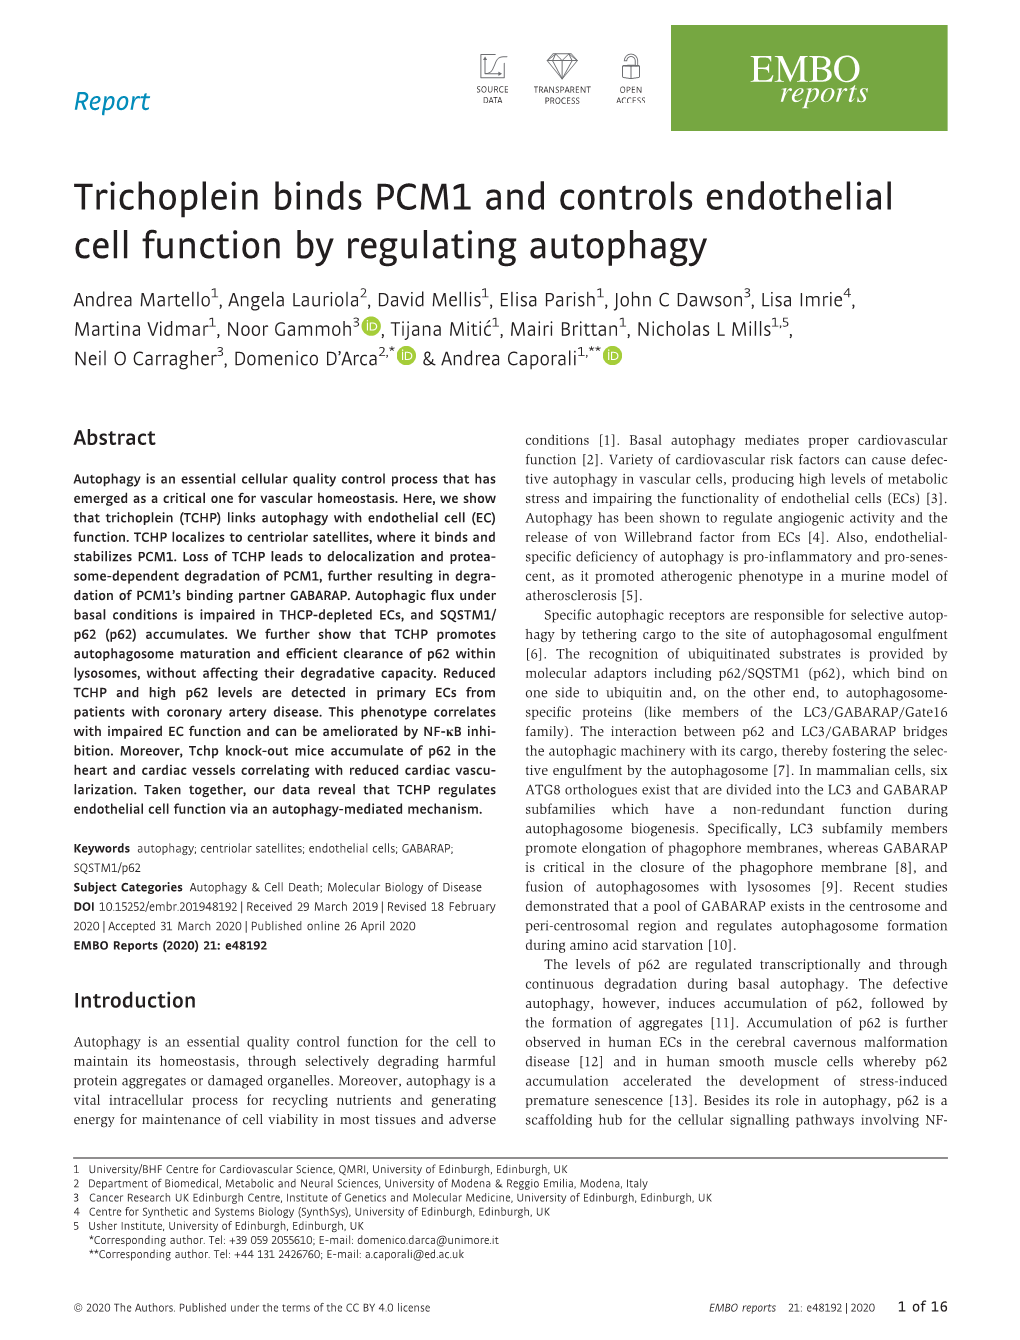 Trichoplein Binds PCM1 and Controls Endothelial Cell Function by Regulating Autophagy